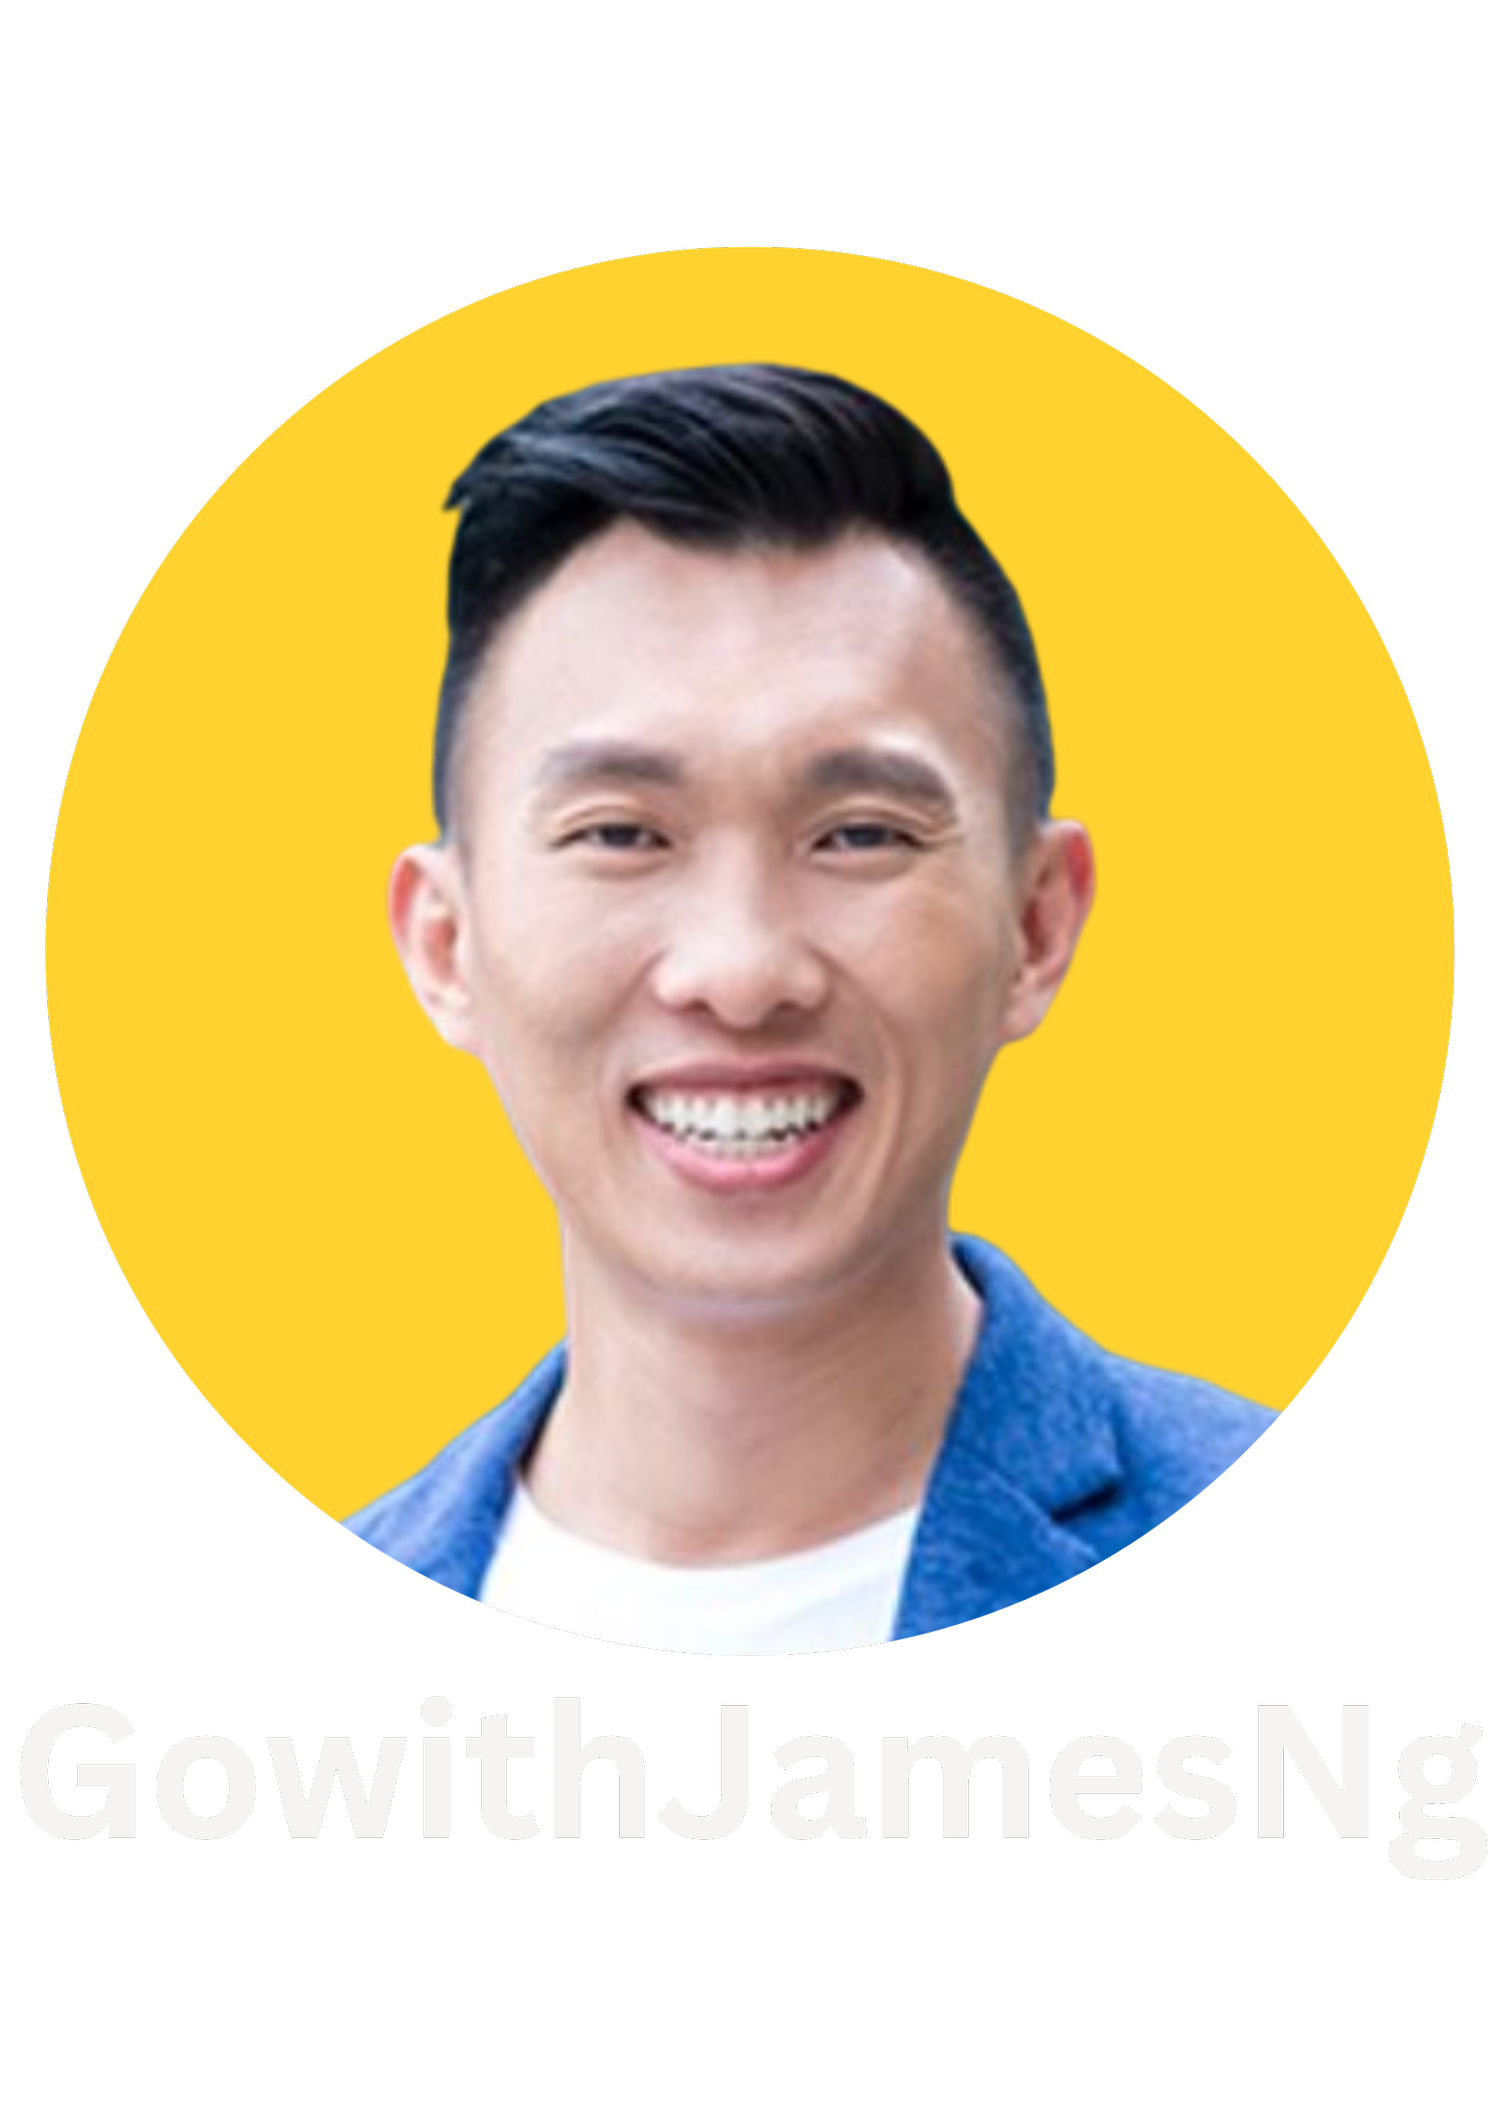 GowithJamesNg